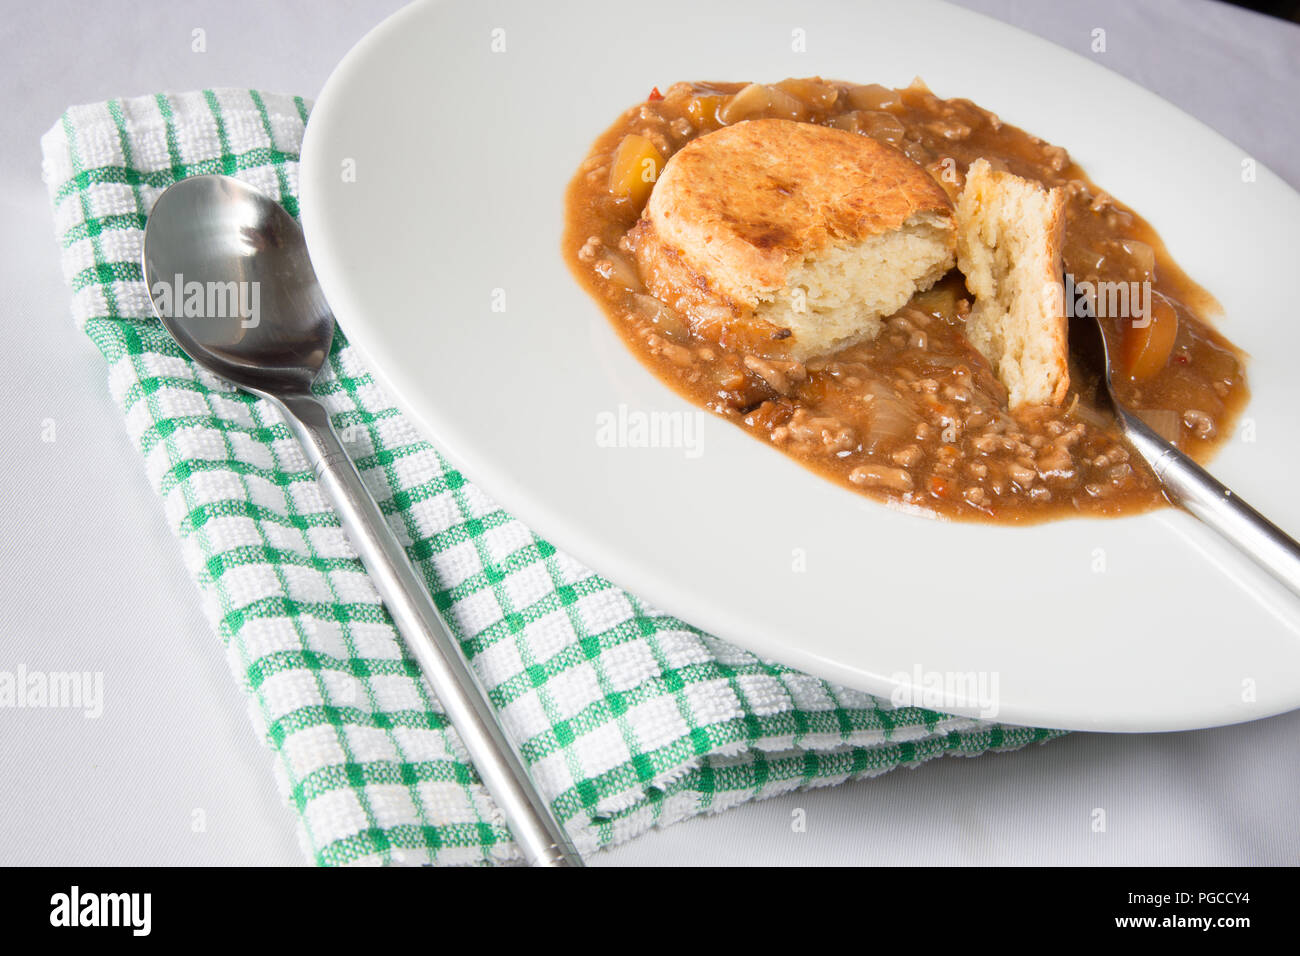 An English pub dish of beef cobbler. Savoury minced beef stew topped with cheese scone. Stock Photo